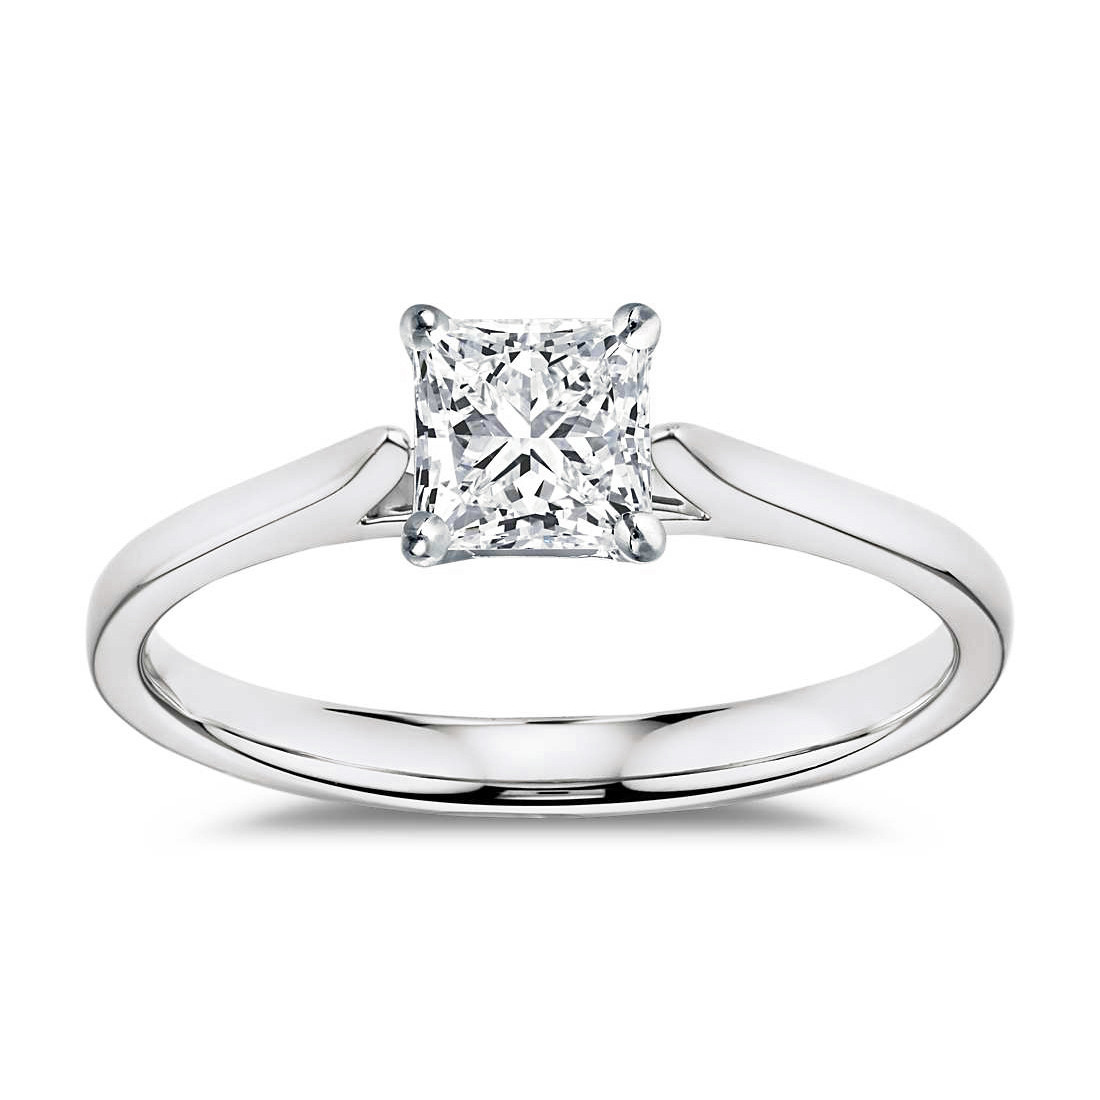 White Gold Princess Cut Engagement Ring
 14k White Gold Certified Princess Cut Diamond Solitaire